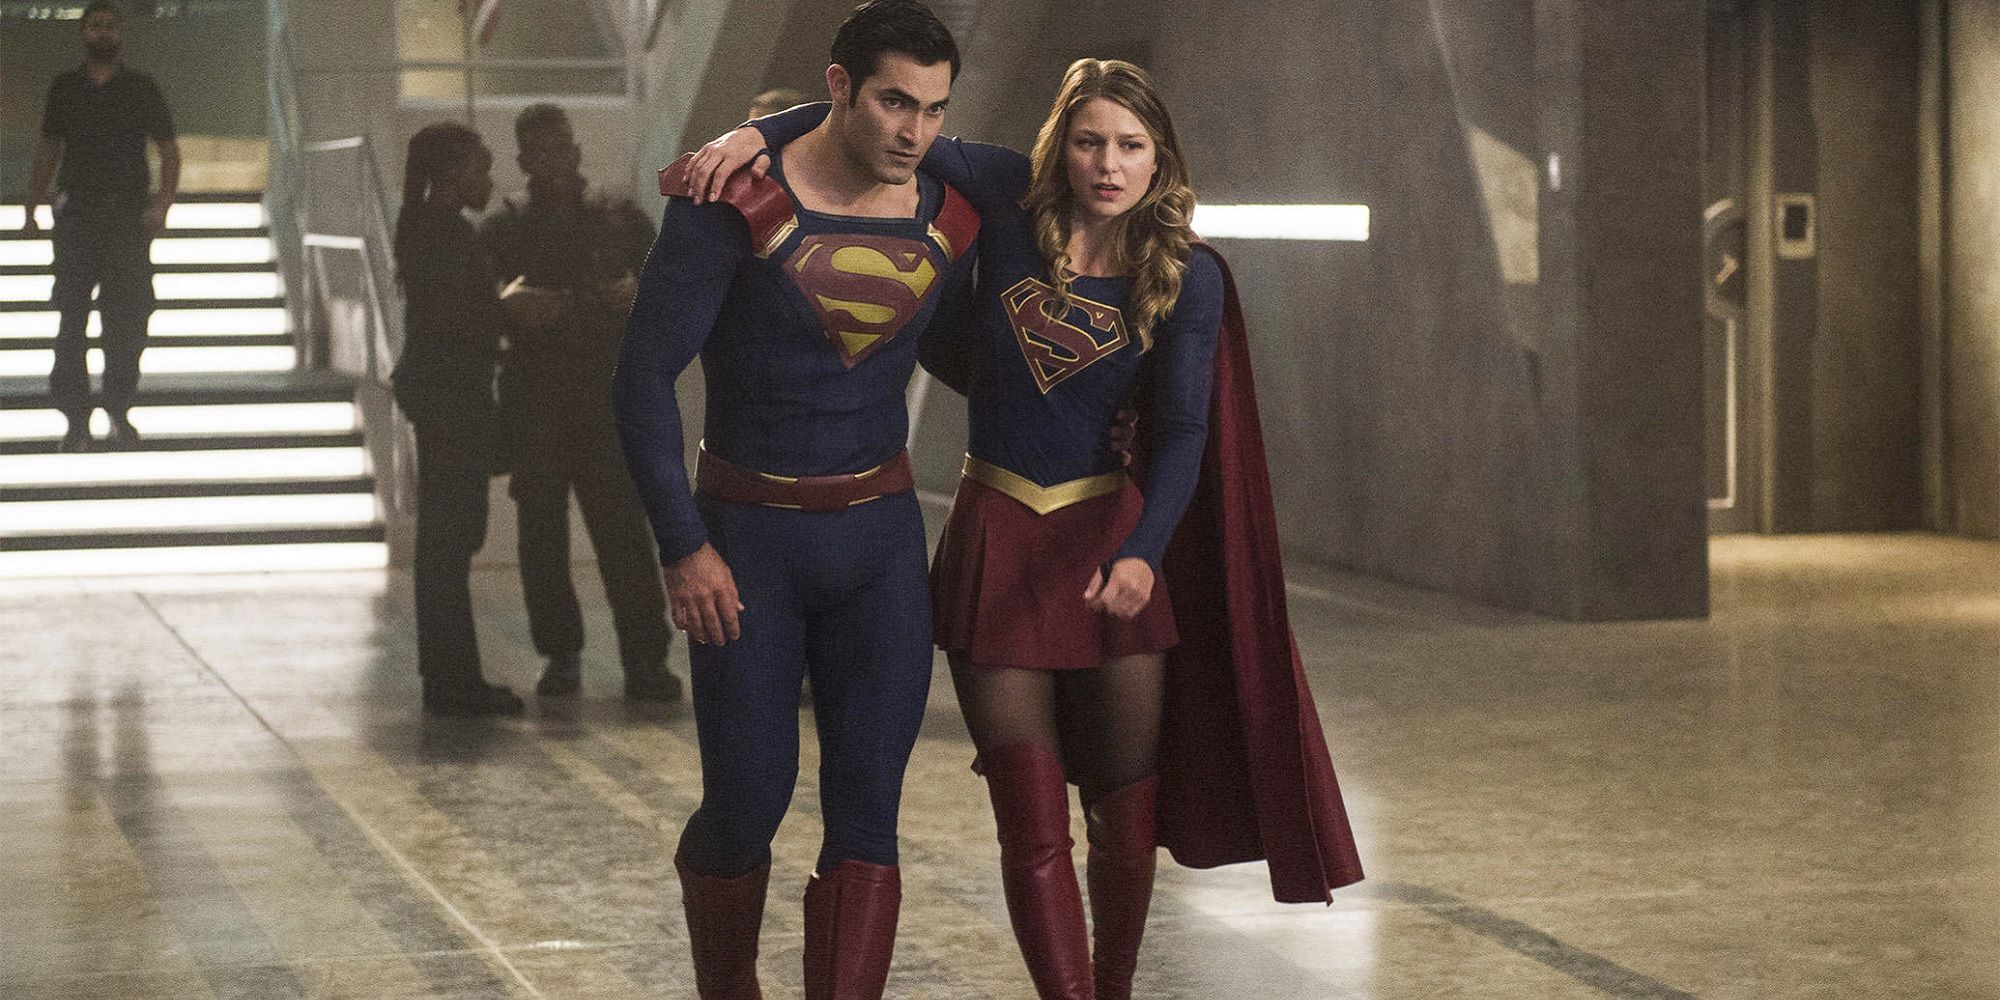 Supergirl and Superman in the Supergirl season 2 premiere